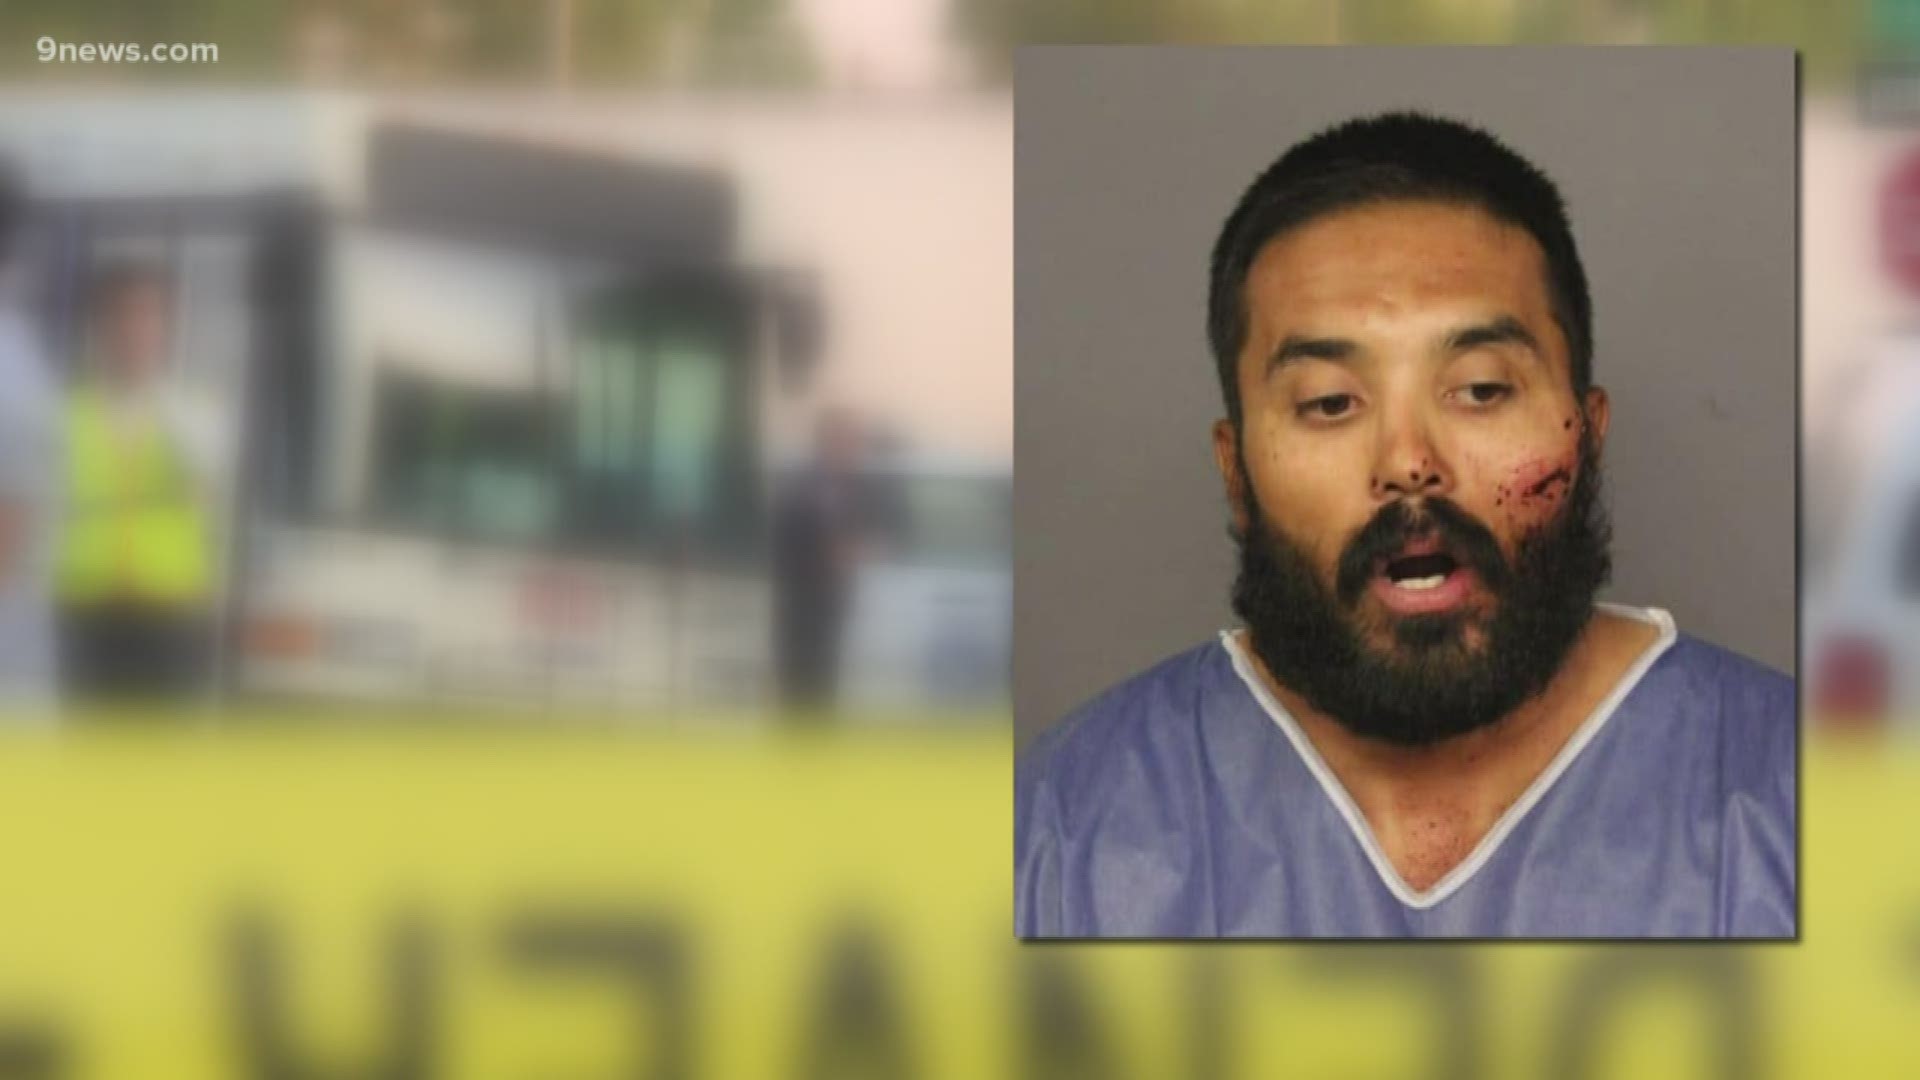 Solomon Garcia faces up to 10 years in prison after pleading guilty to charges in connection with the theft of an RTD bus in August.